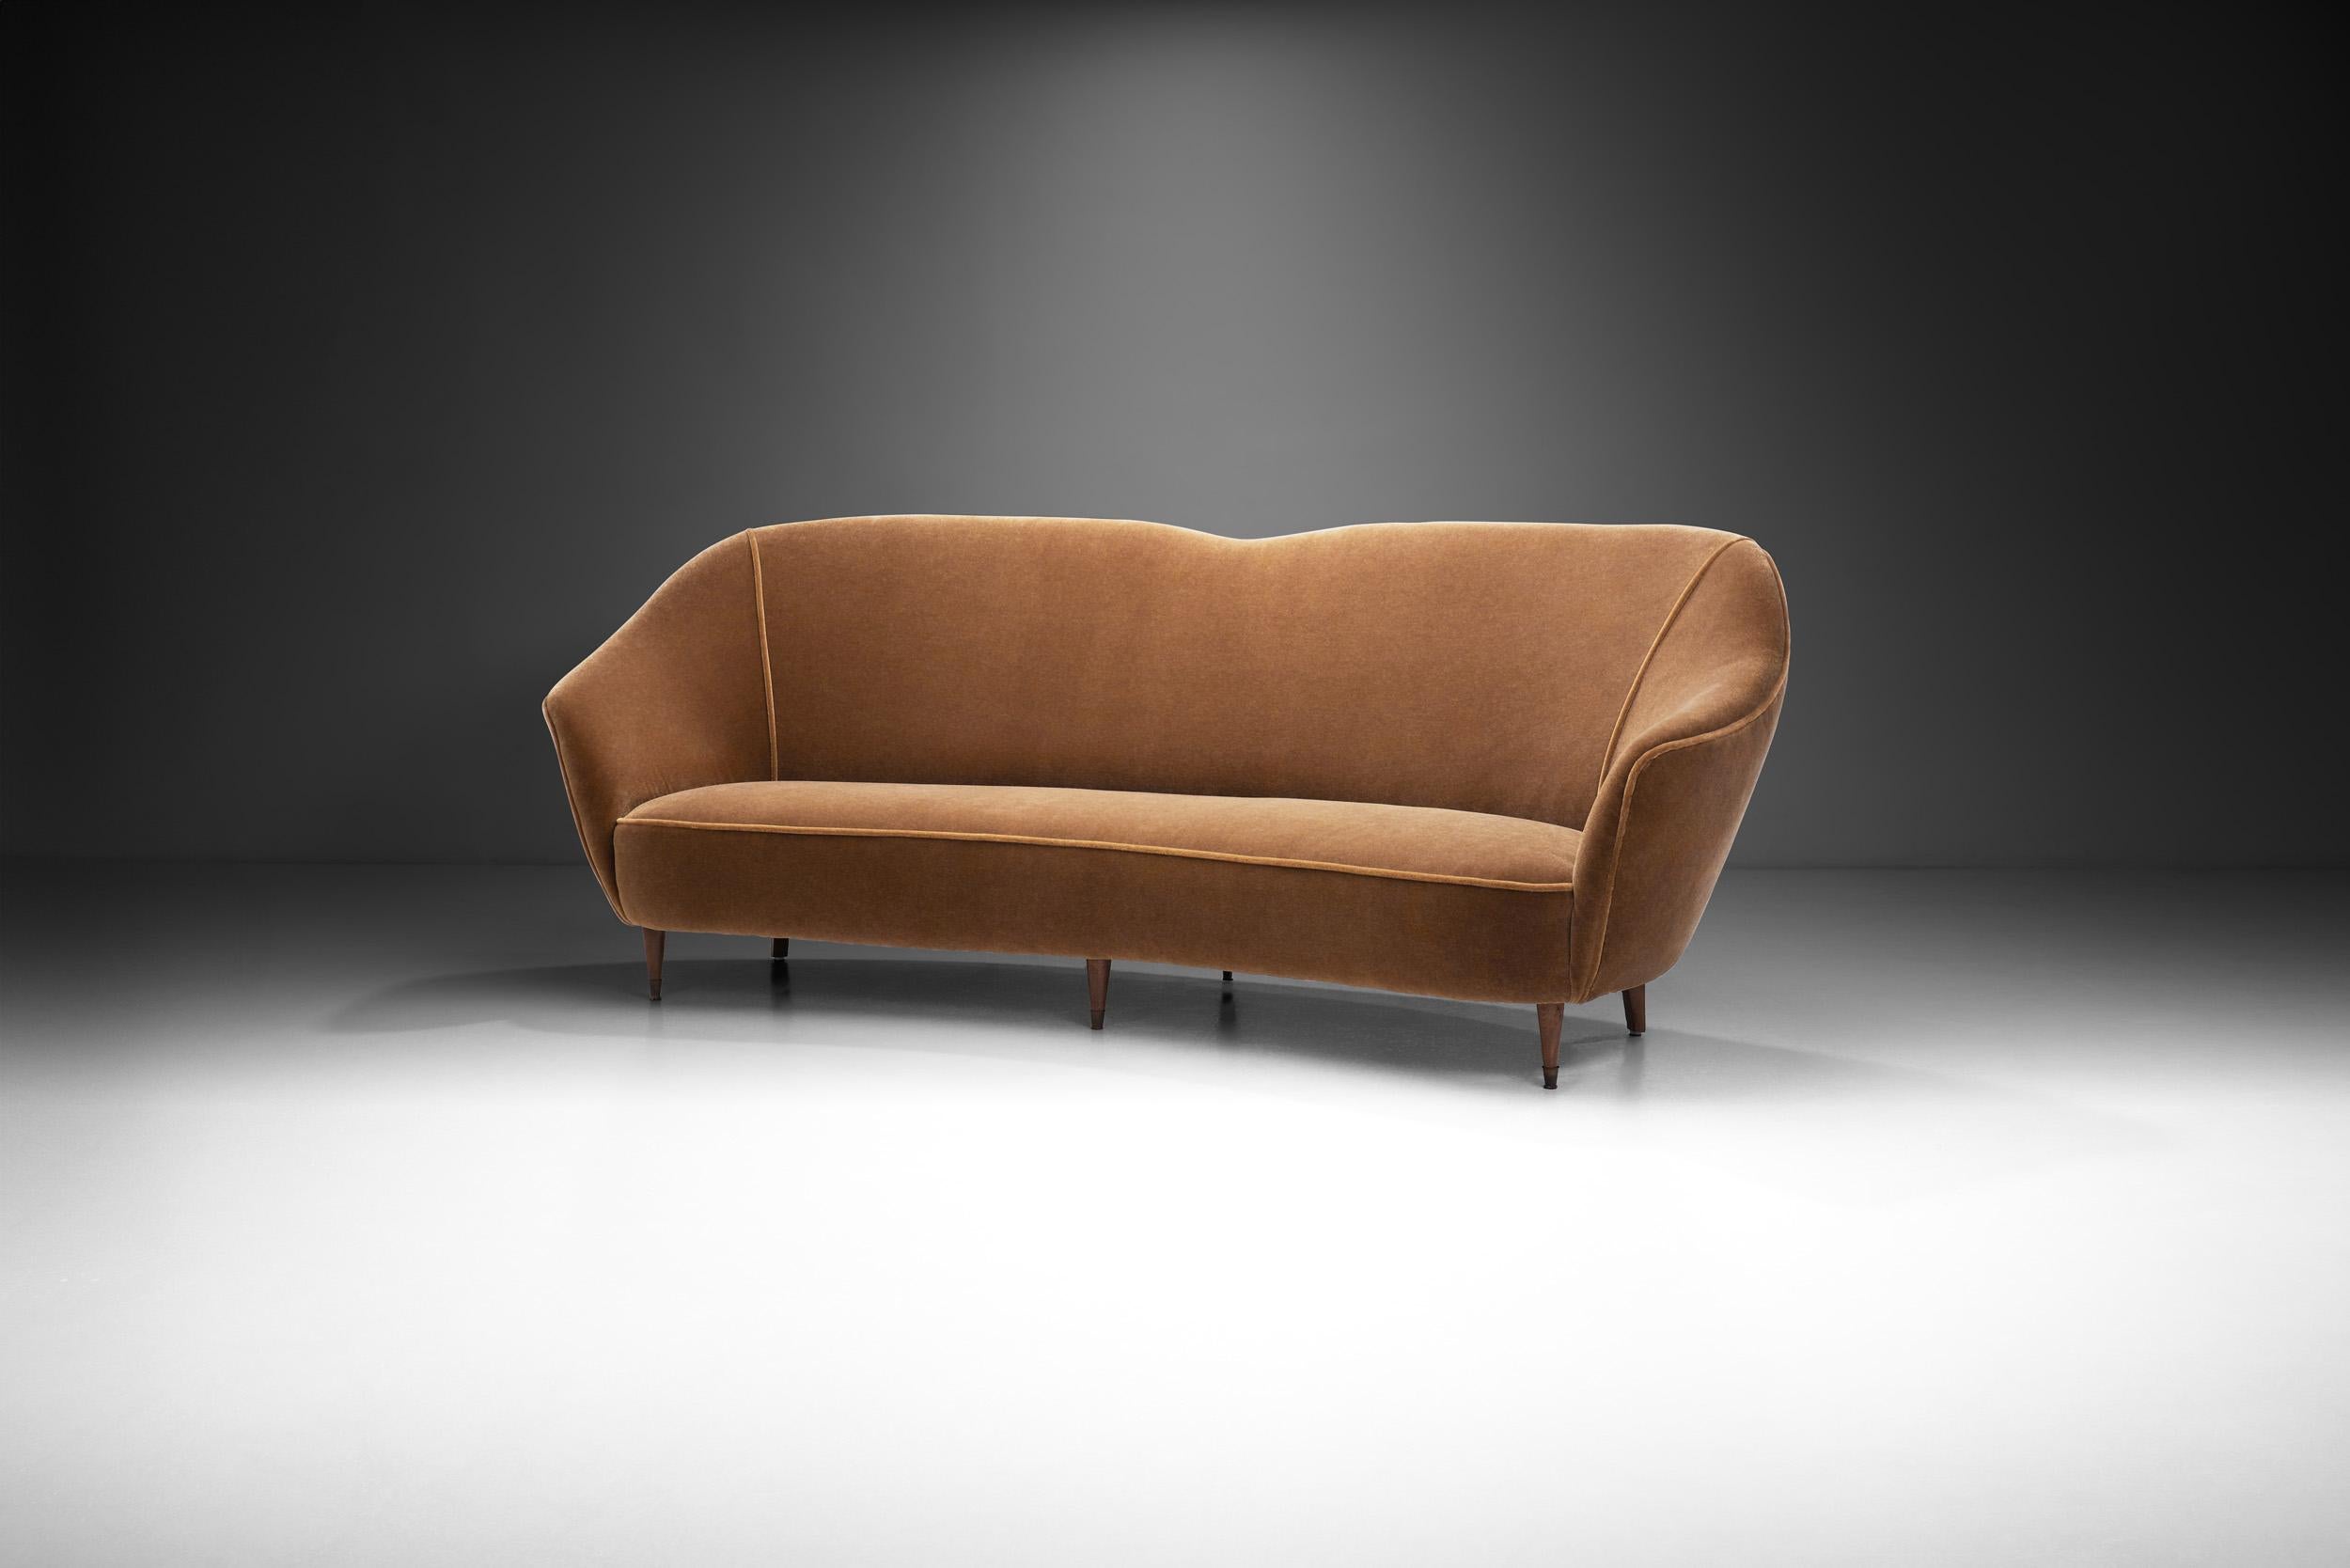 The European perspective on cabinetmaking is exceptional, and wood is omnipresent in mid-century modernism. This sumptuous curved sofa features the immediately recognizable touches of Modernism: exquisite materials, craftsmanship, and an elegantly